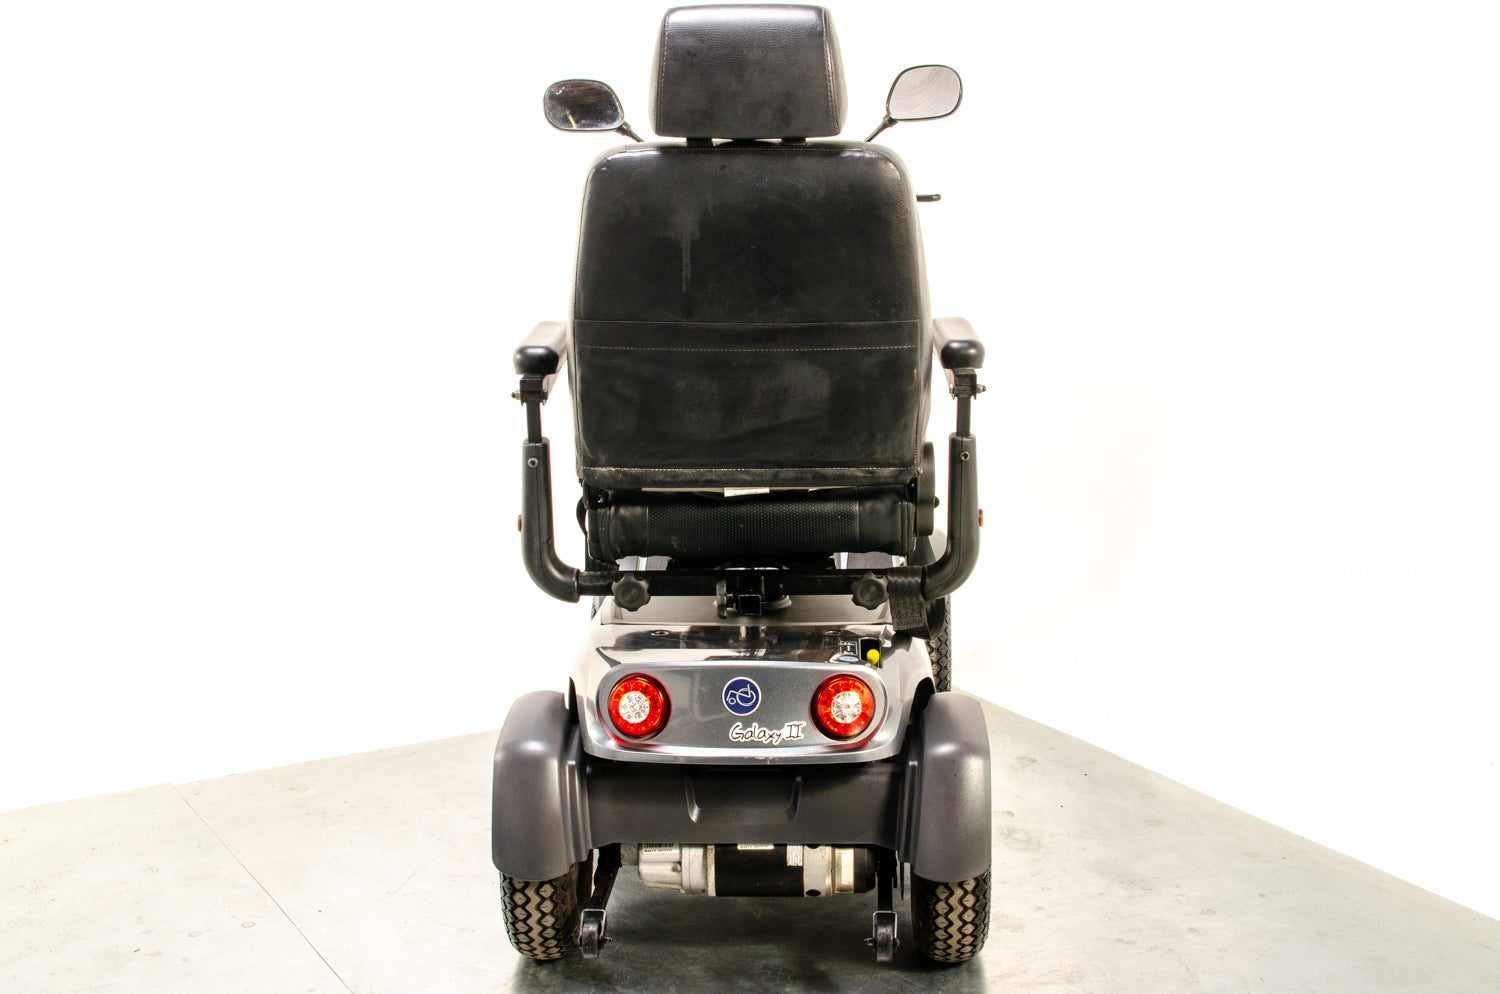 Excel Galaxy II Used Mobility Scooter 8mph Large Comfy Class 3 Road Legal Grey 03507